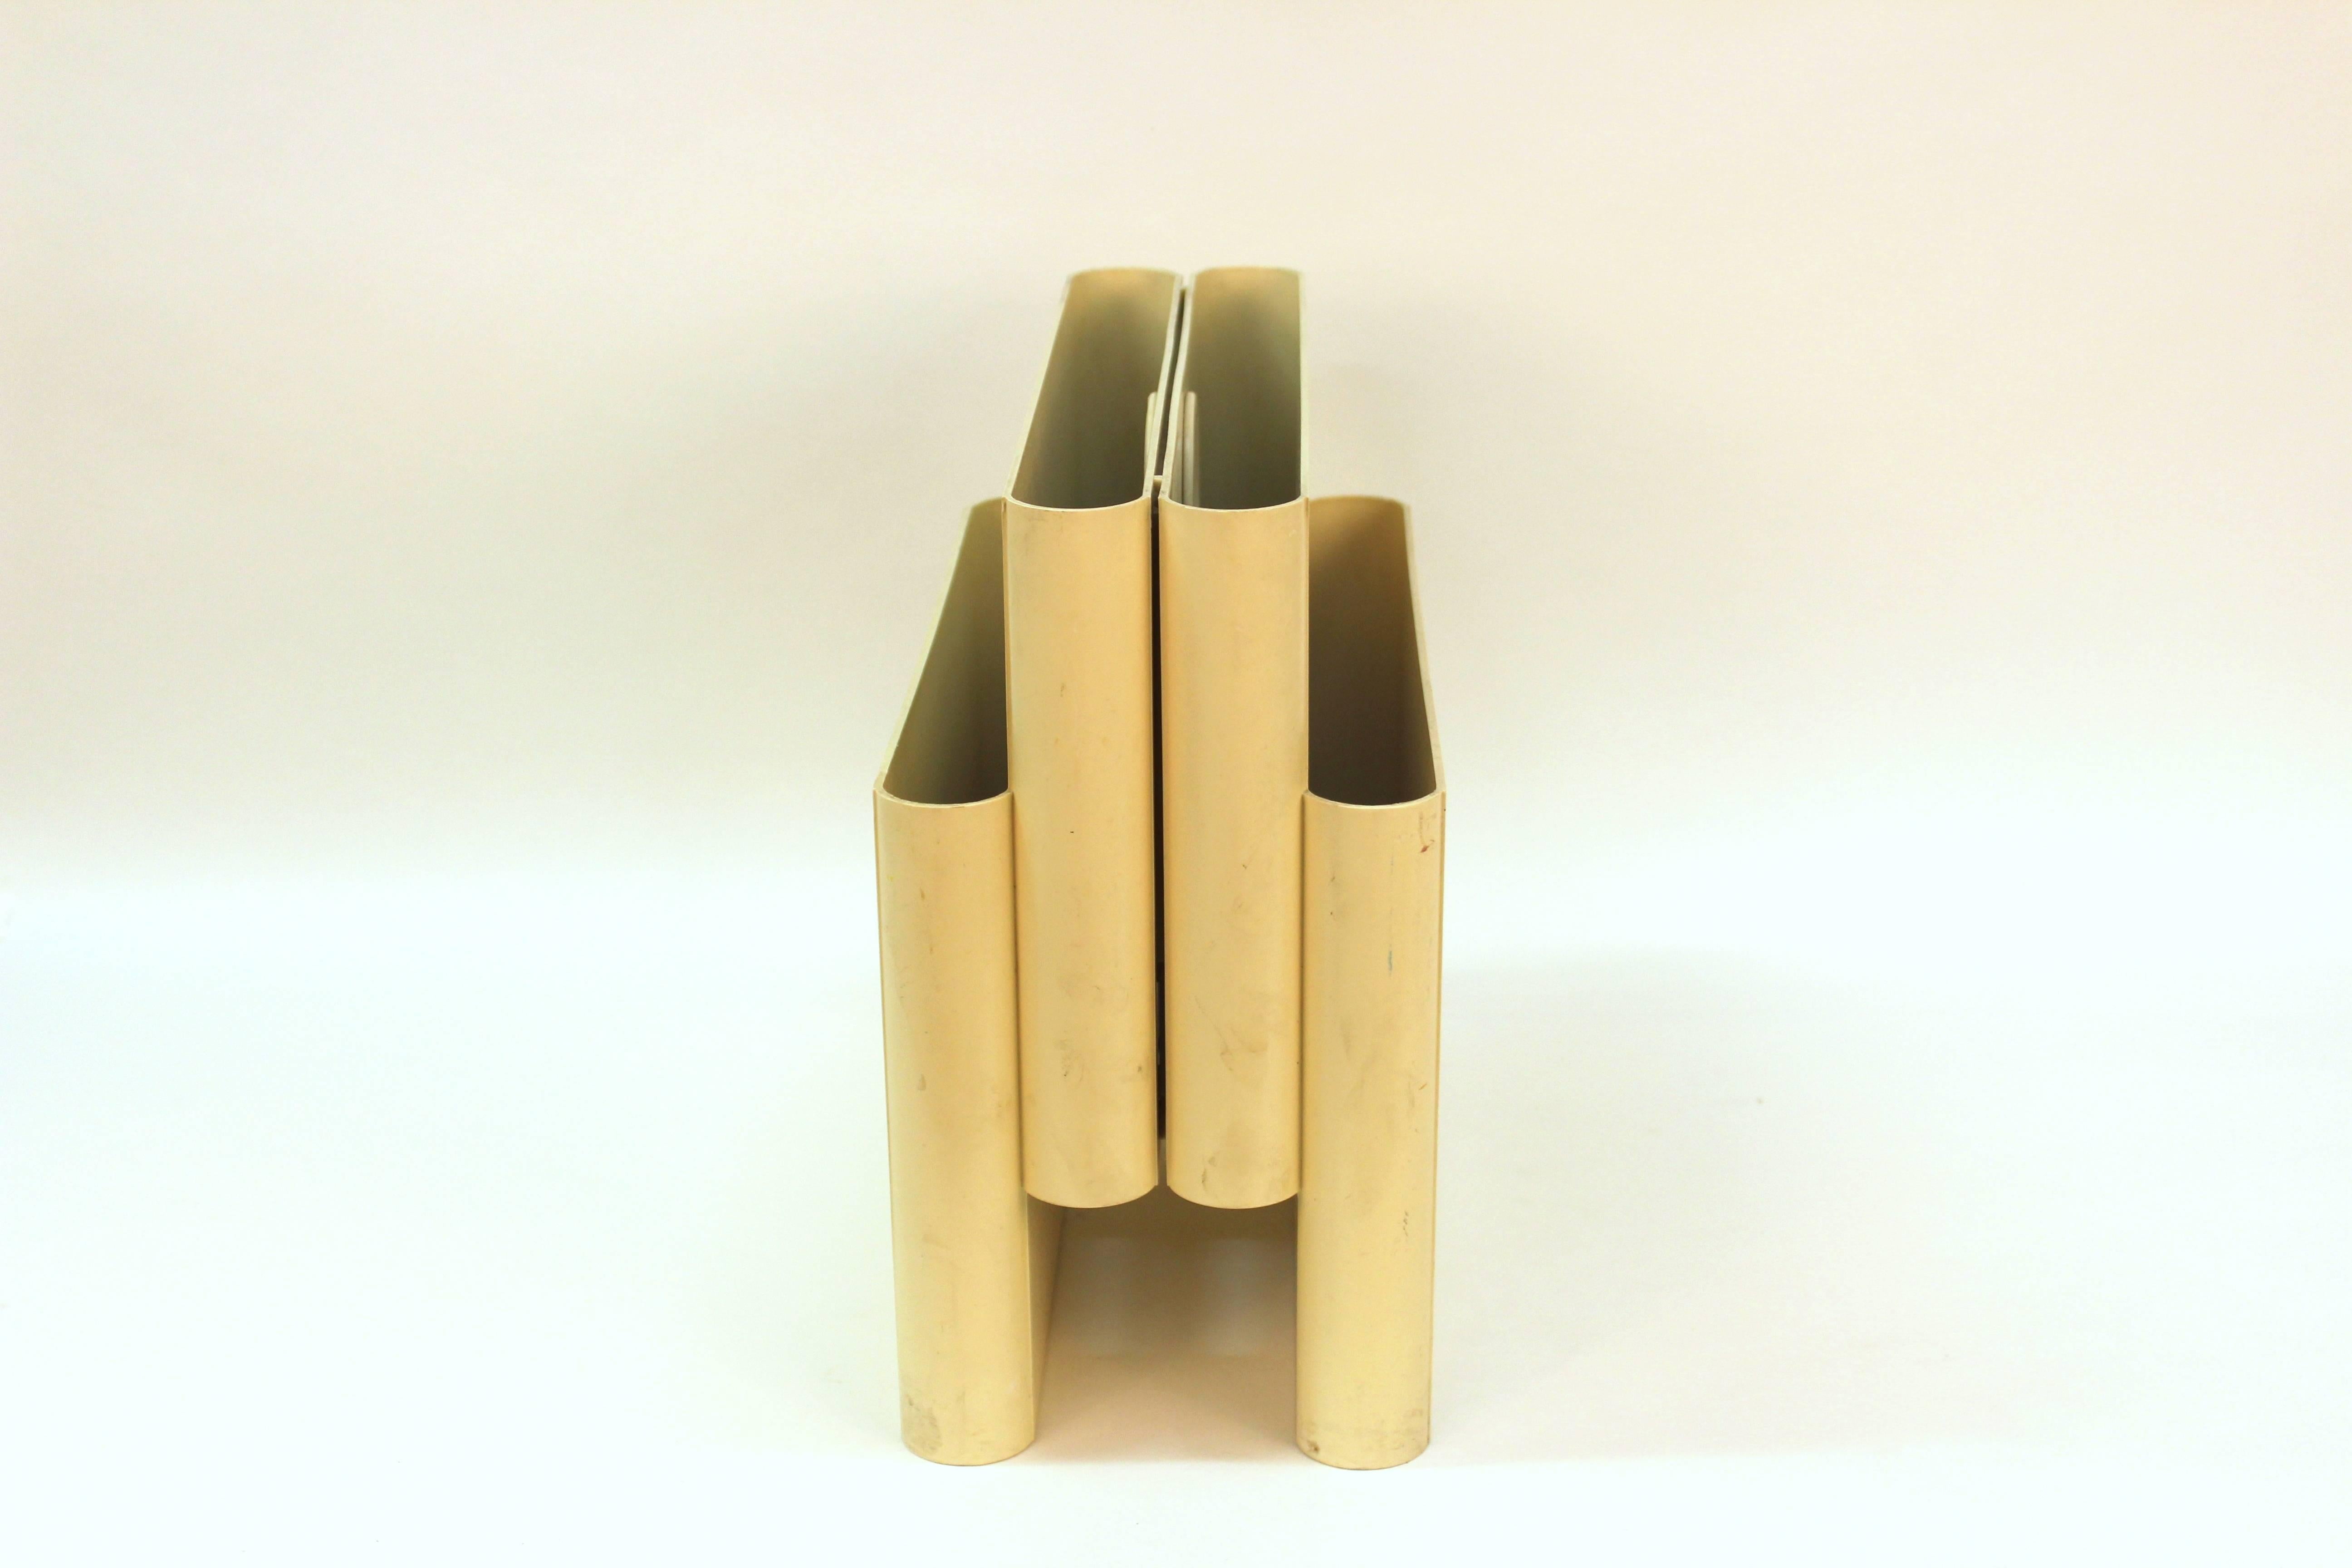 Magazine rack in ABS plastic from 1972 with four magazine slots as well as a hole for carrying. Designed by Giotto Stoppino for Kartell (the Italian design company). This magazine rack is marked on the verso. In good vintage condition with age